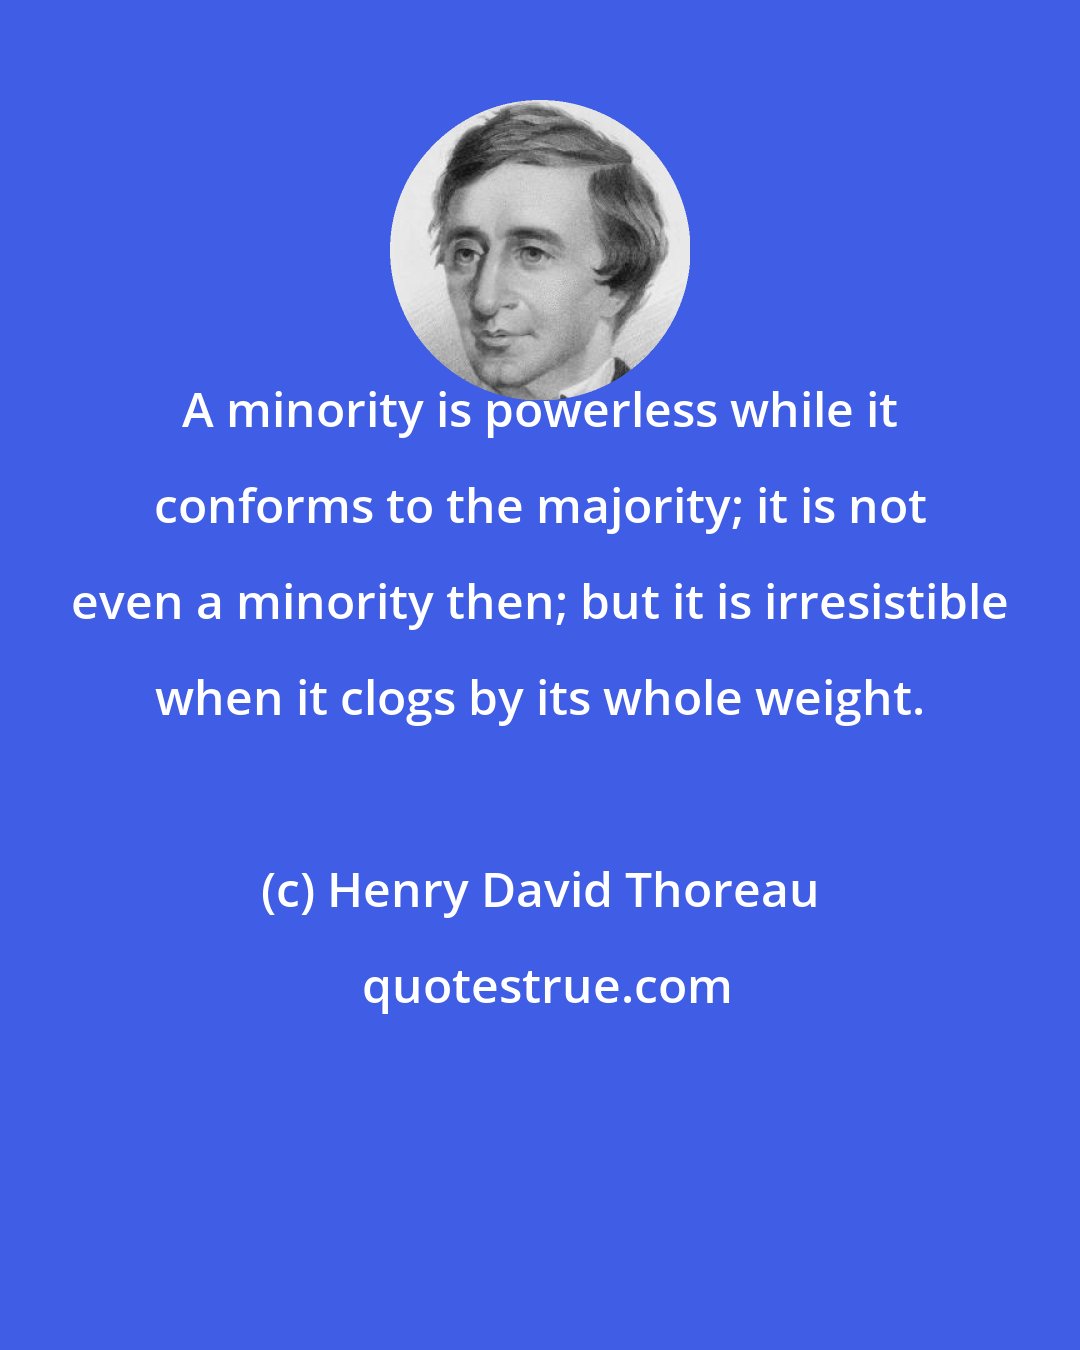 Henry David Thoreau: A minority is powerless while it conforms to the majority; it is not even a minority then; but it is irresistible when it clogs by its whole weight.